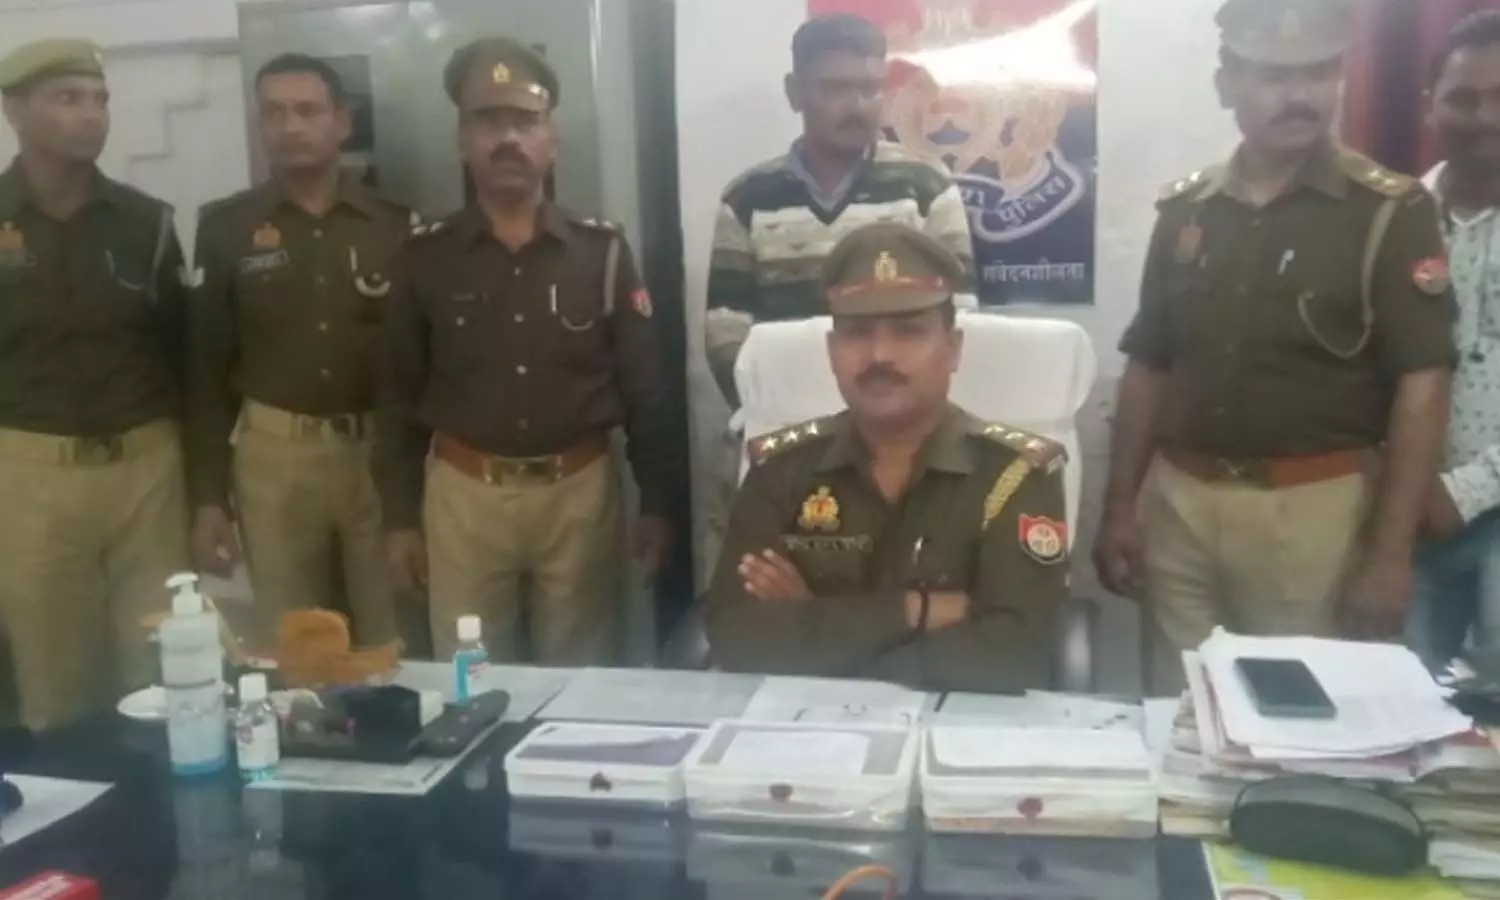 Haryanas vicious gang was stealing in AC train, jewelery worth 16.5 lakh recovered